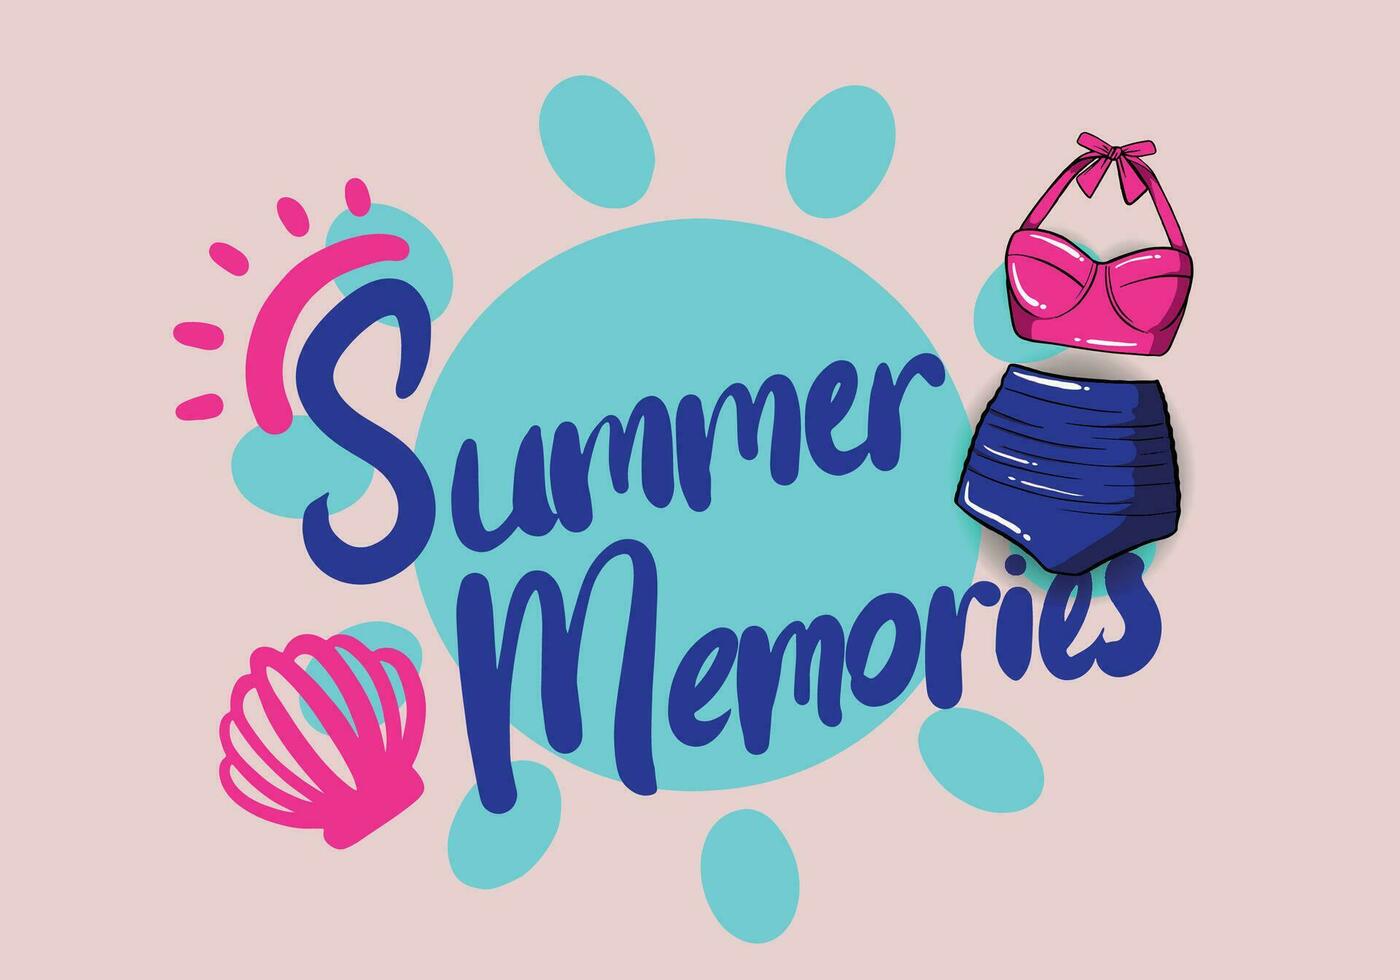 Beautiful tropical illustration with trendy lettering. Cute hand drawn summer prints. Perfect for stickers, labels, tshirts, banner, tags. Vector isolated phrases and quotes.